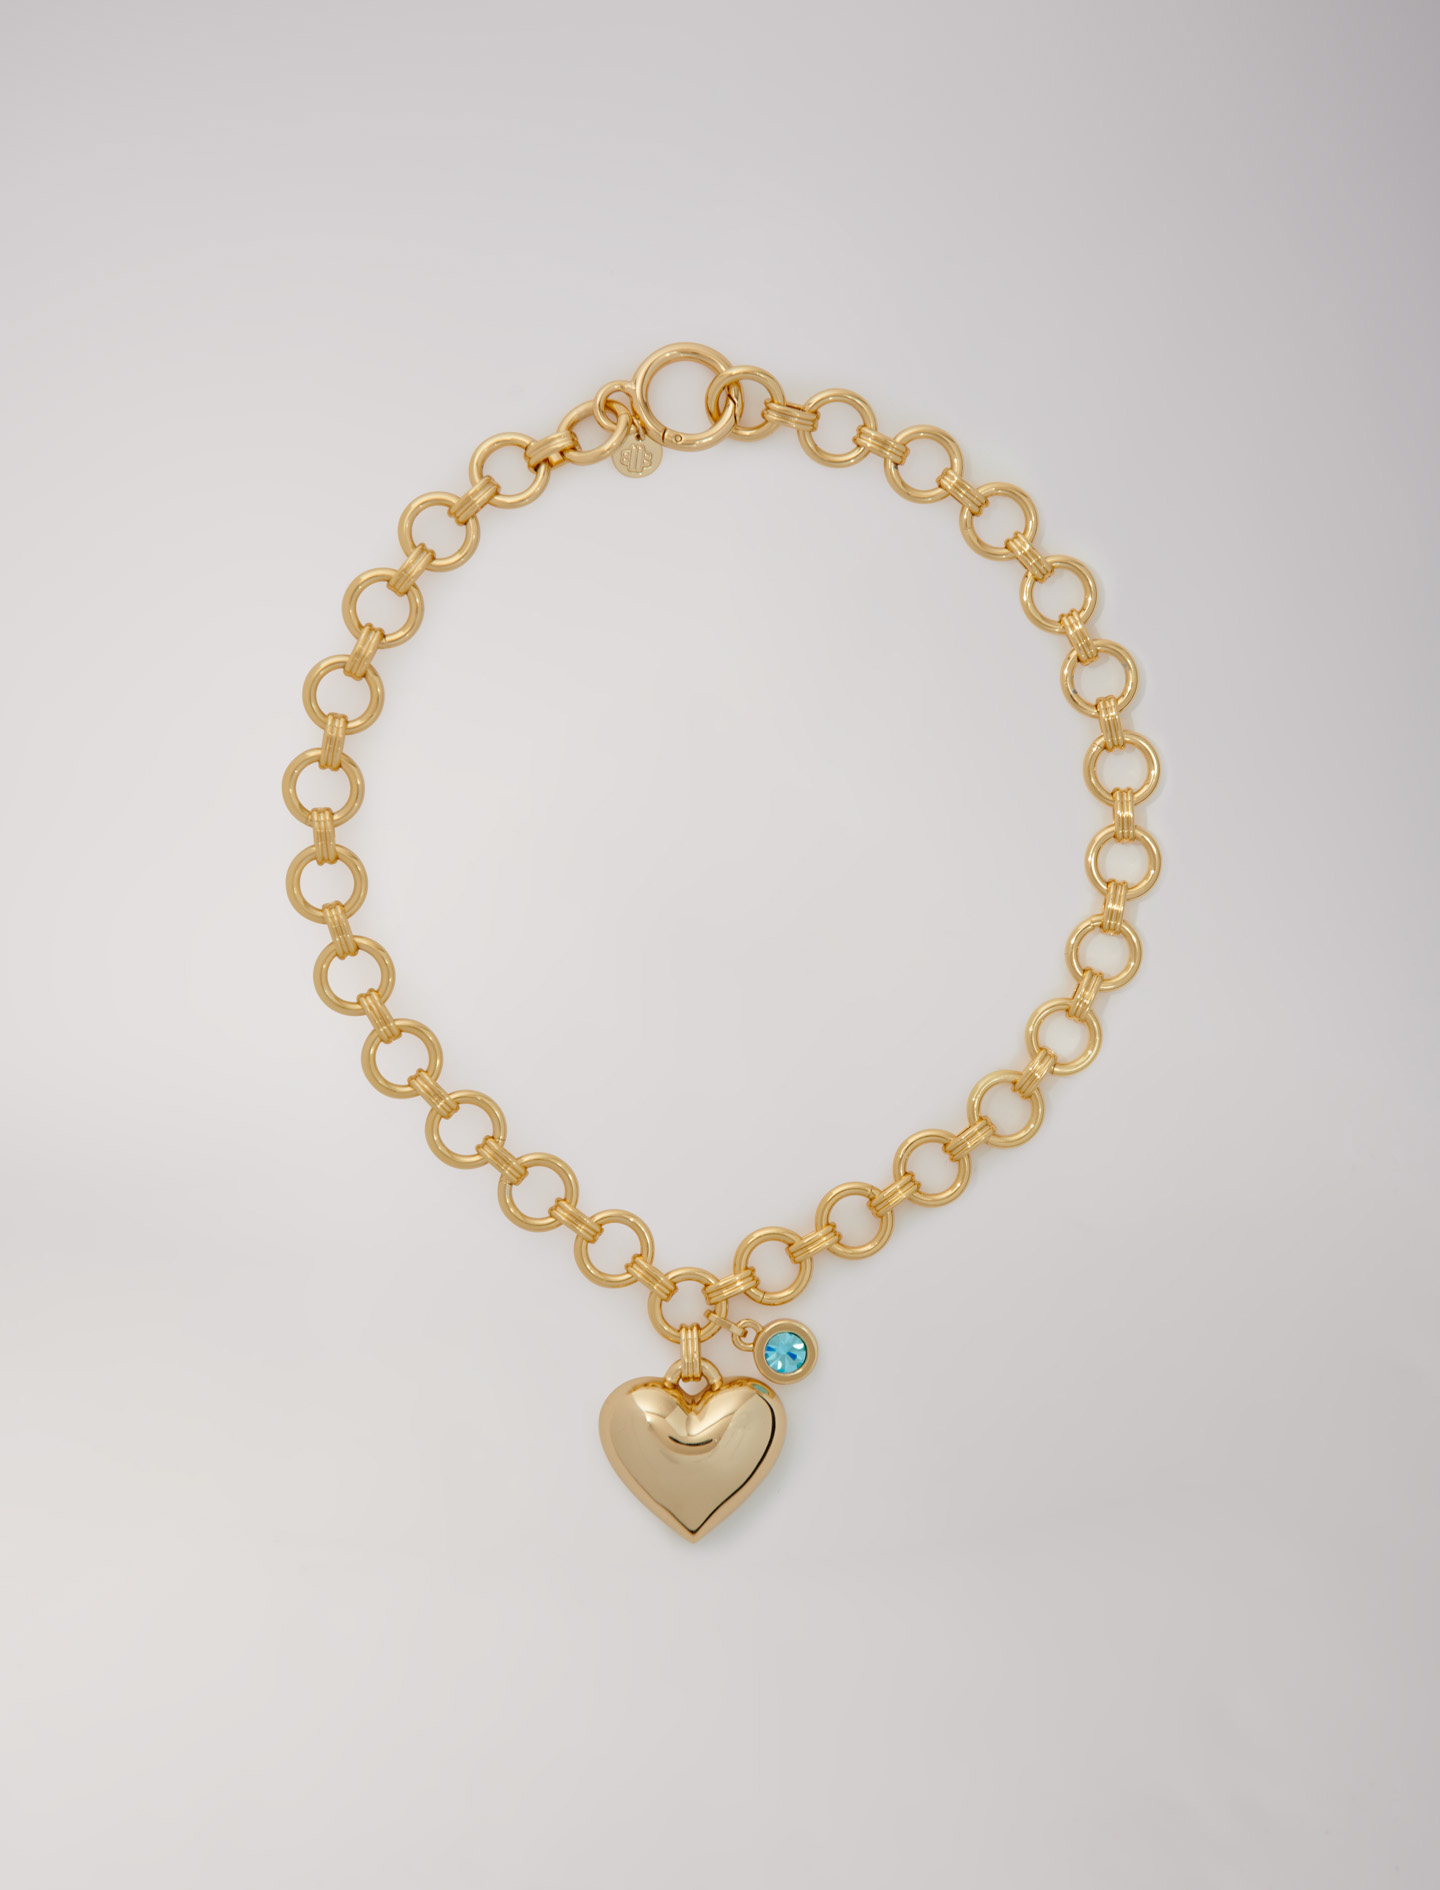 Woman's brass, Gold heart necklace for Spring/Summer, size Woman-Jewelry-OS (ONE SIZE), in color Gold / Yellow